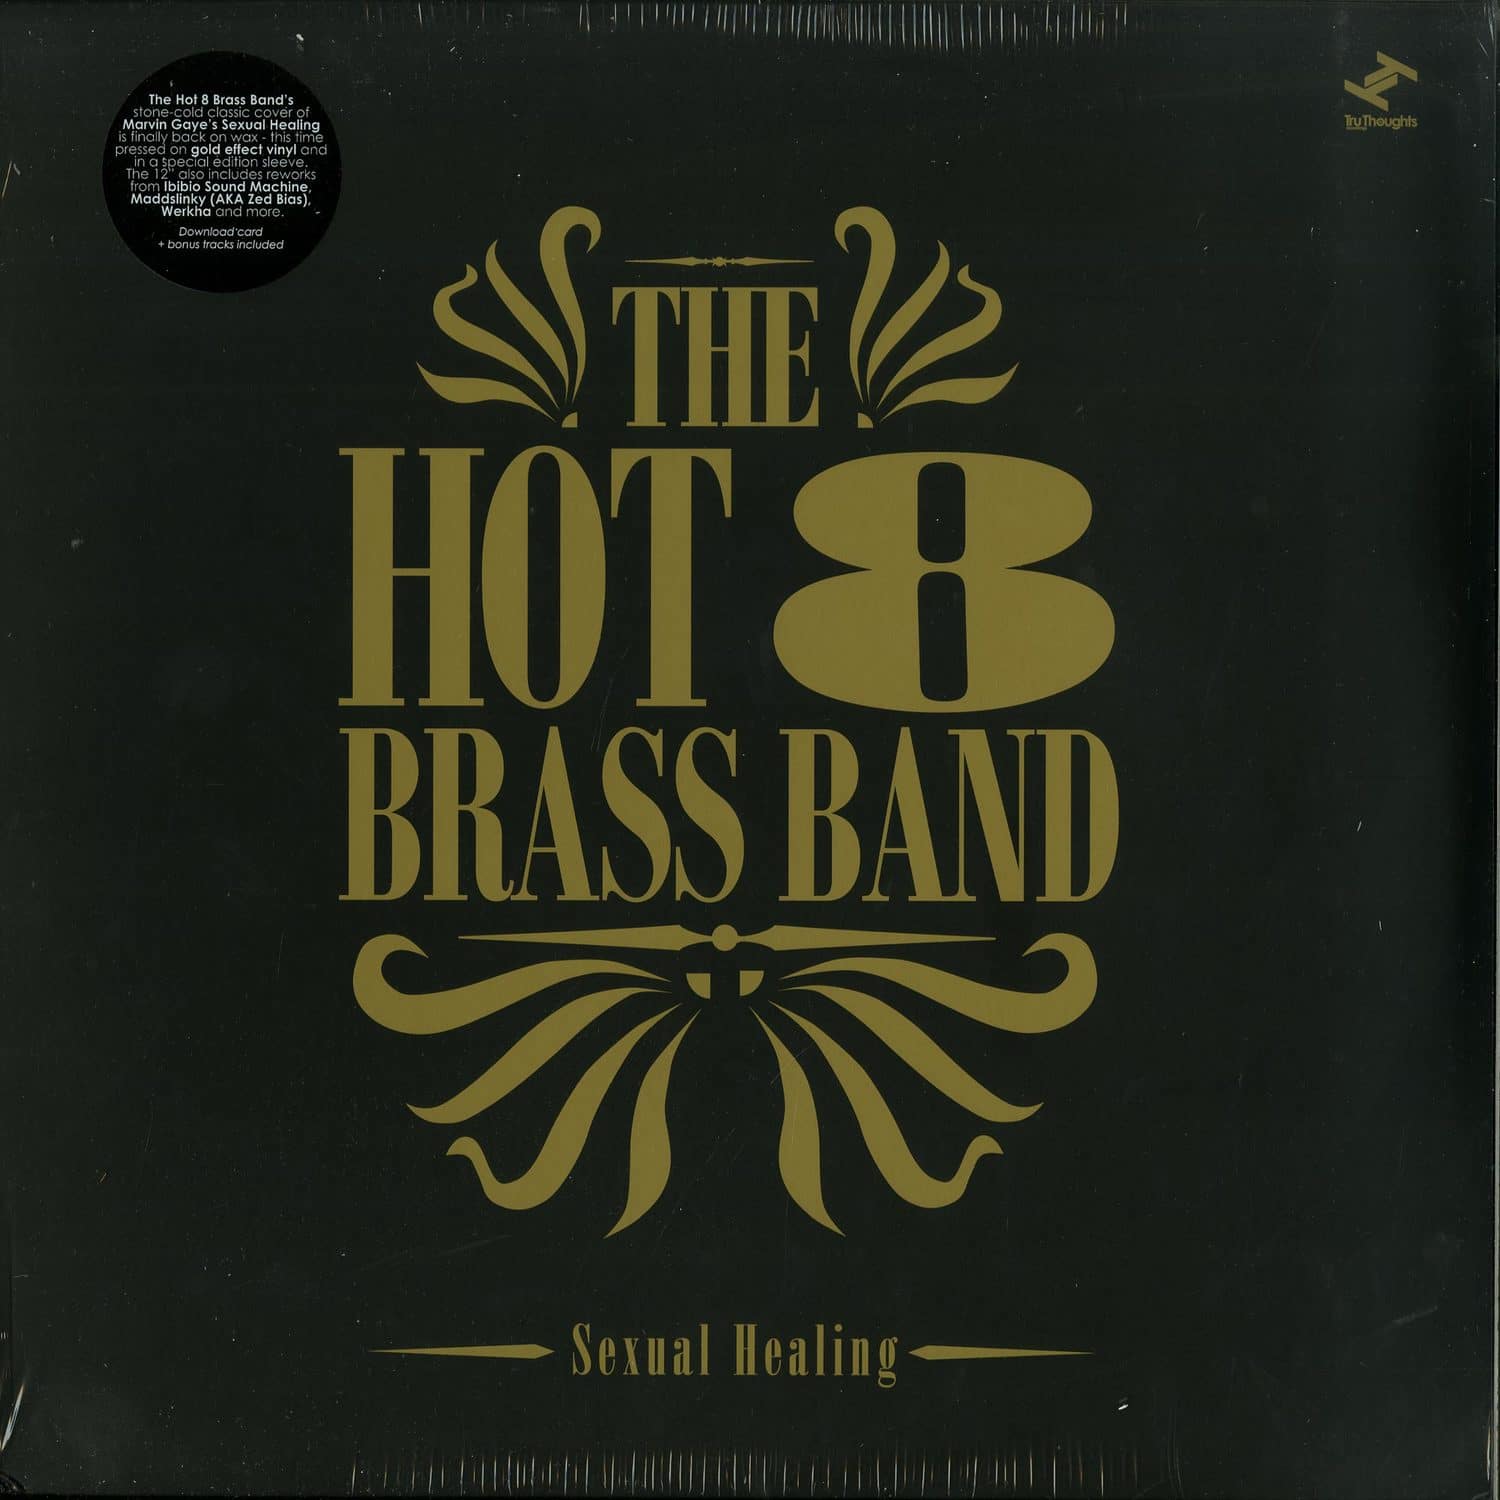 The Hot 8 Brass Band - SEXUAL HEALING 